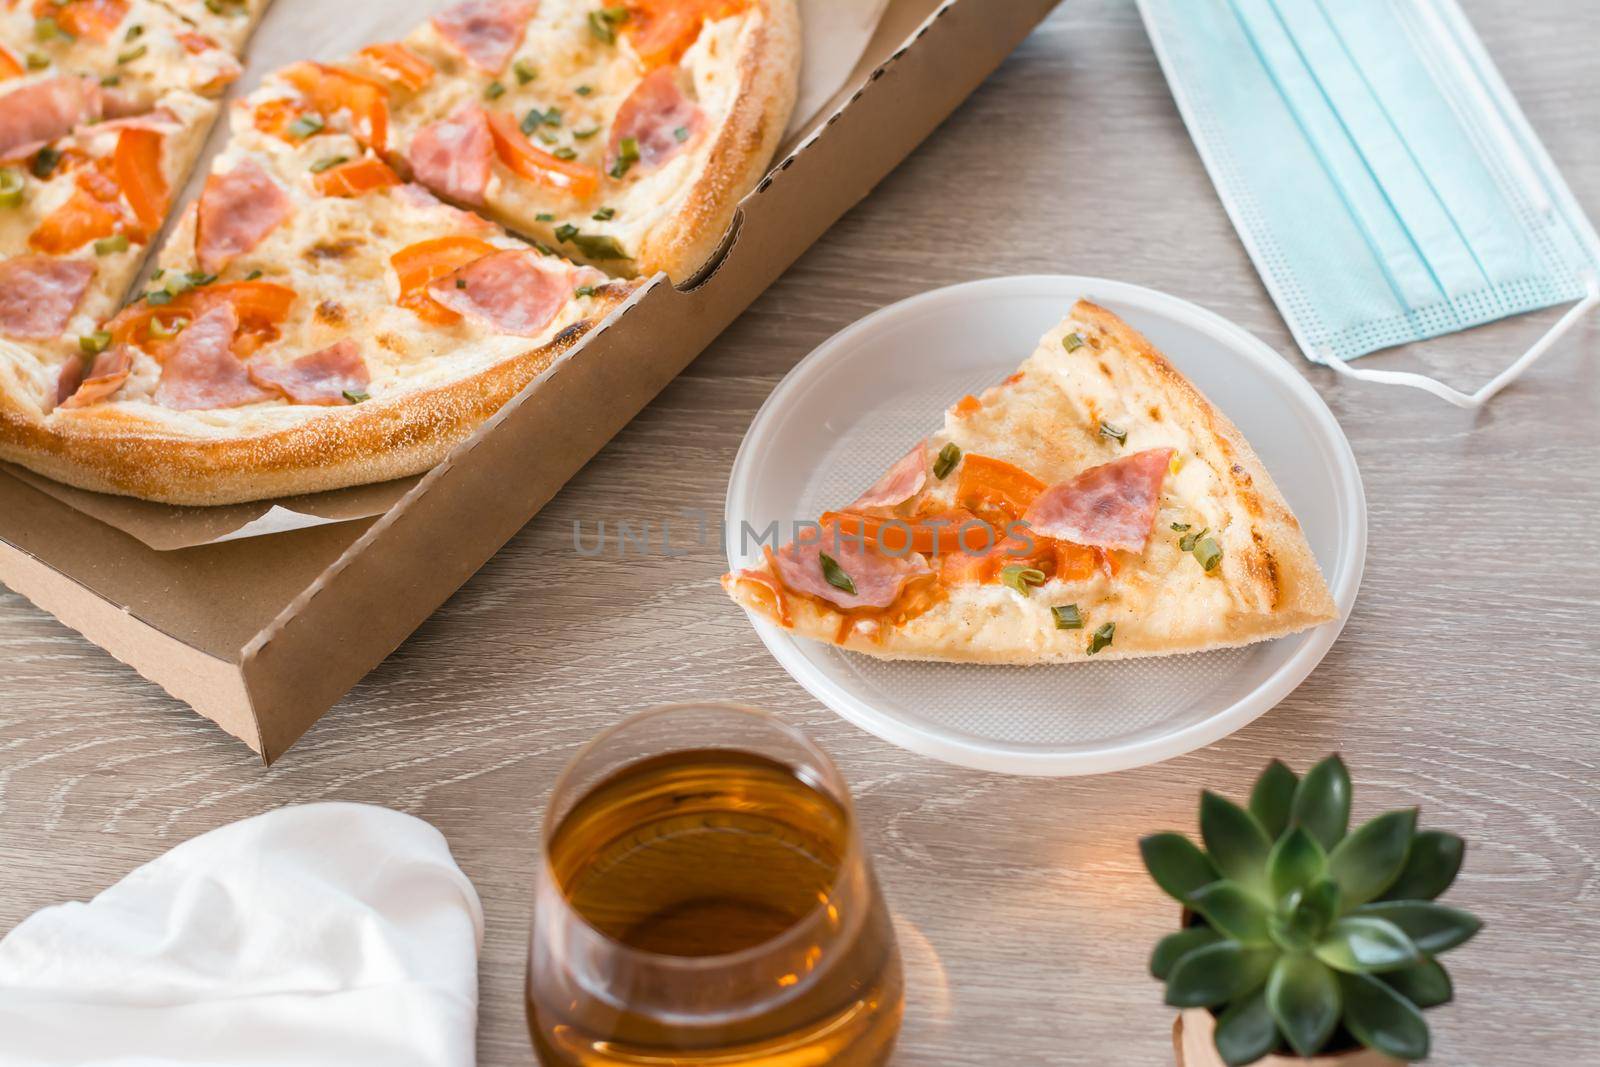 Takeout food. A slice of pizza in a disposable plastic plate, protective mask and a box of pizza on the table in the kitchen.